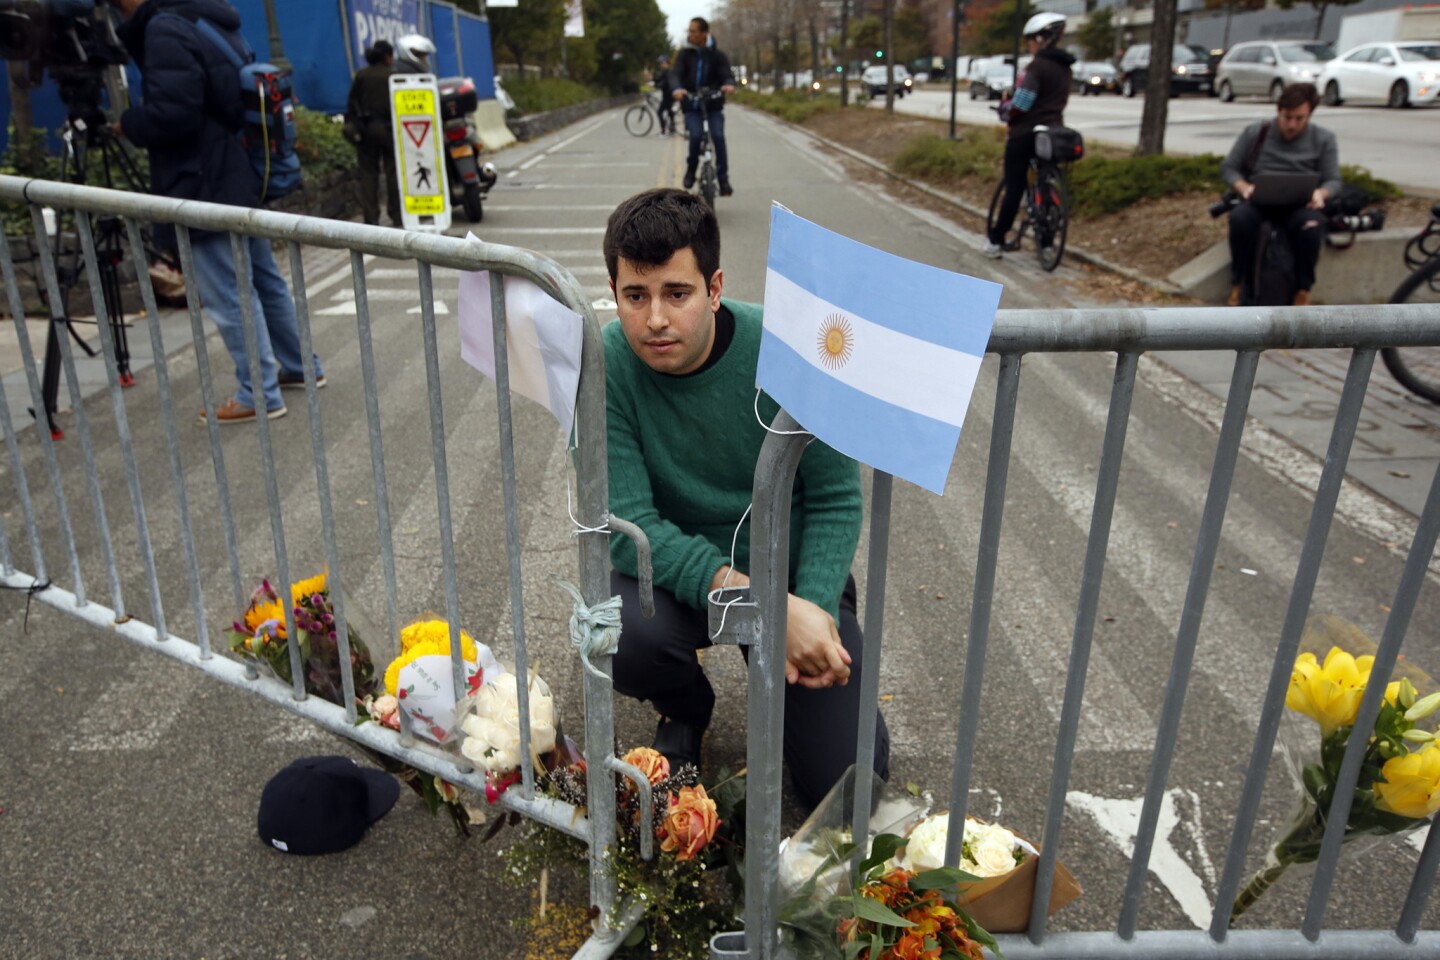 George Embiricos, 27, leaves flowers on the bike path along West Street in Manhattan. "I walk the path every day. It's been a source of peace for me. It's hard to see the city where I grew up like this," he said.